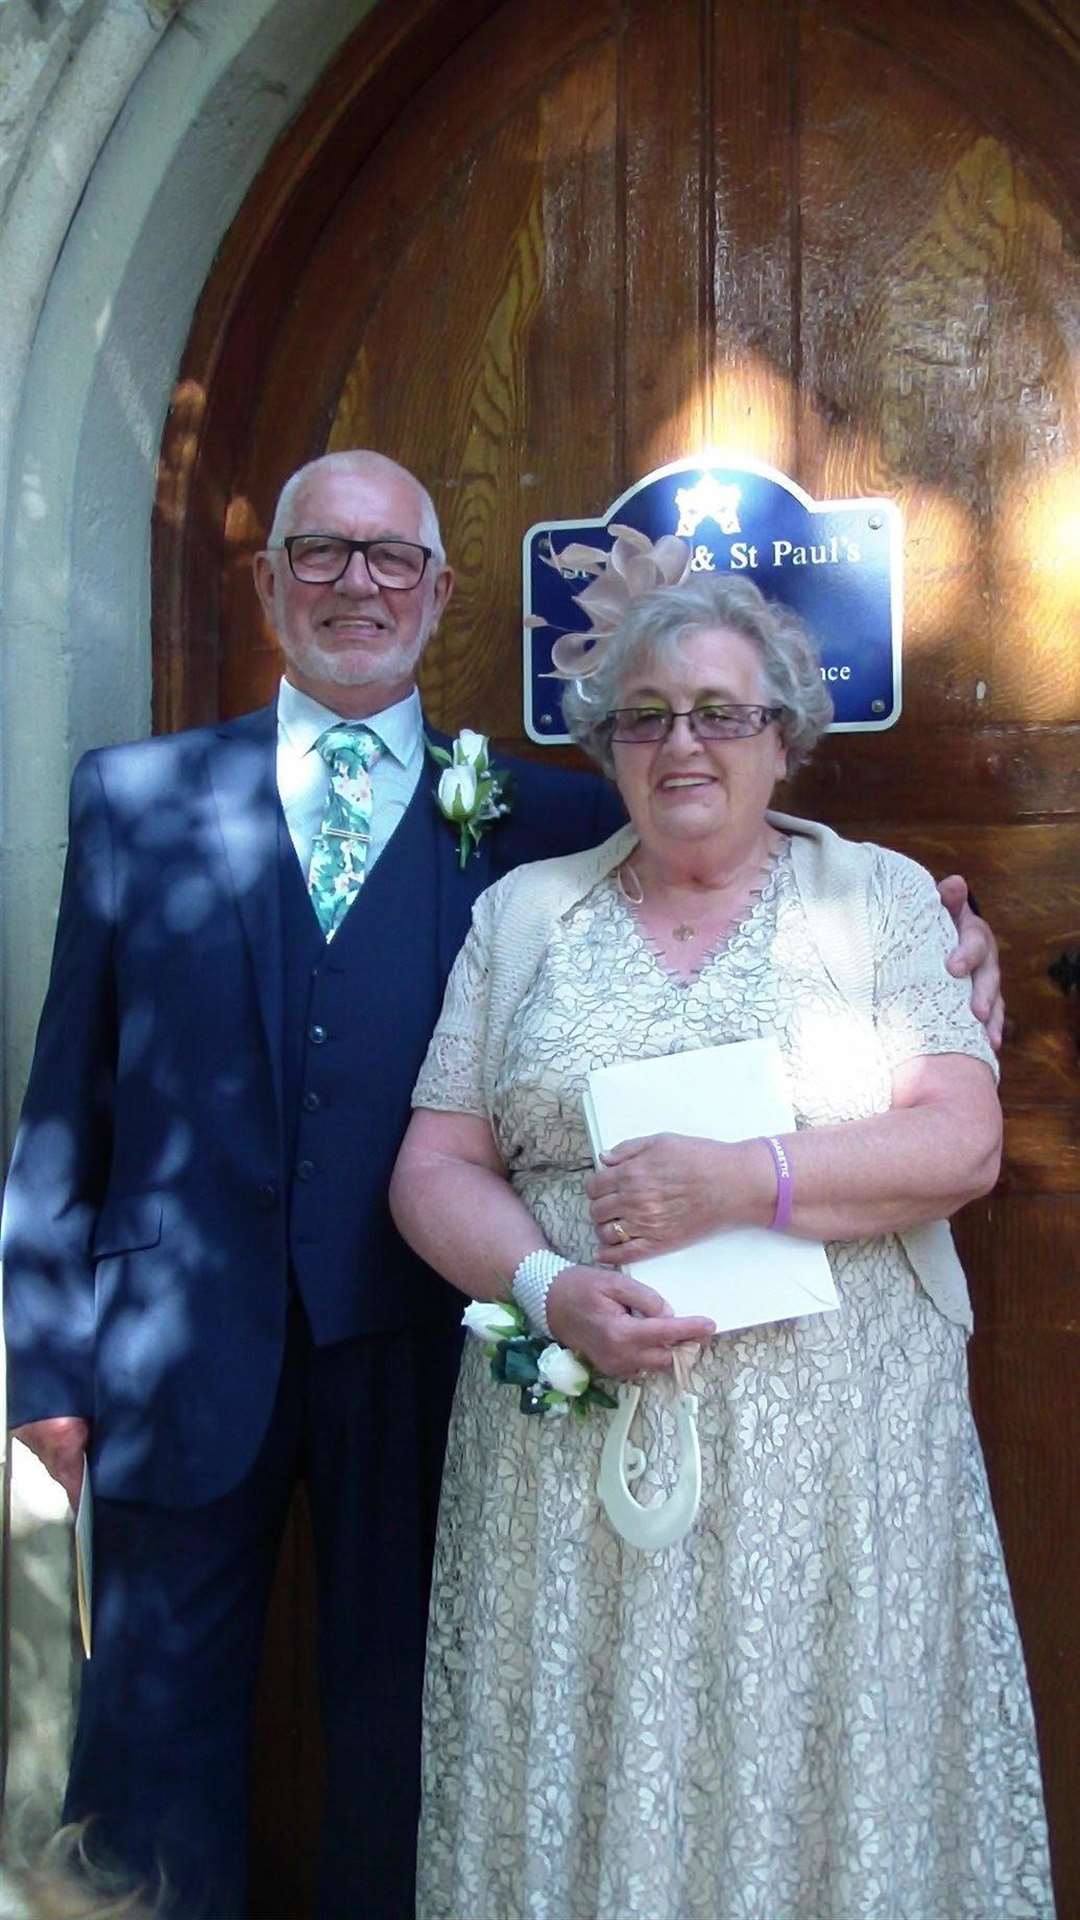 The couple recently celebrated their 60th wedding anniversary